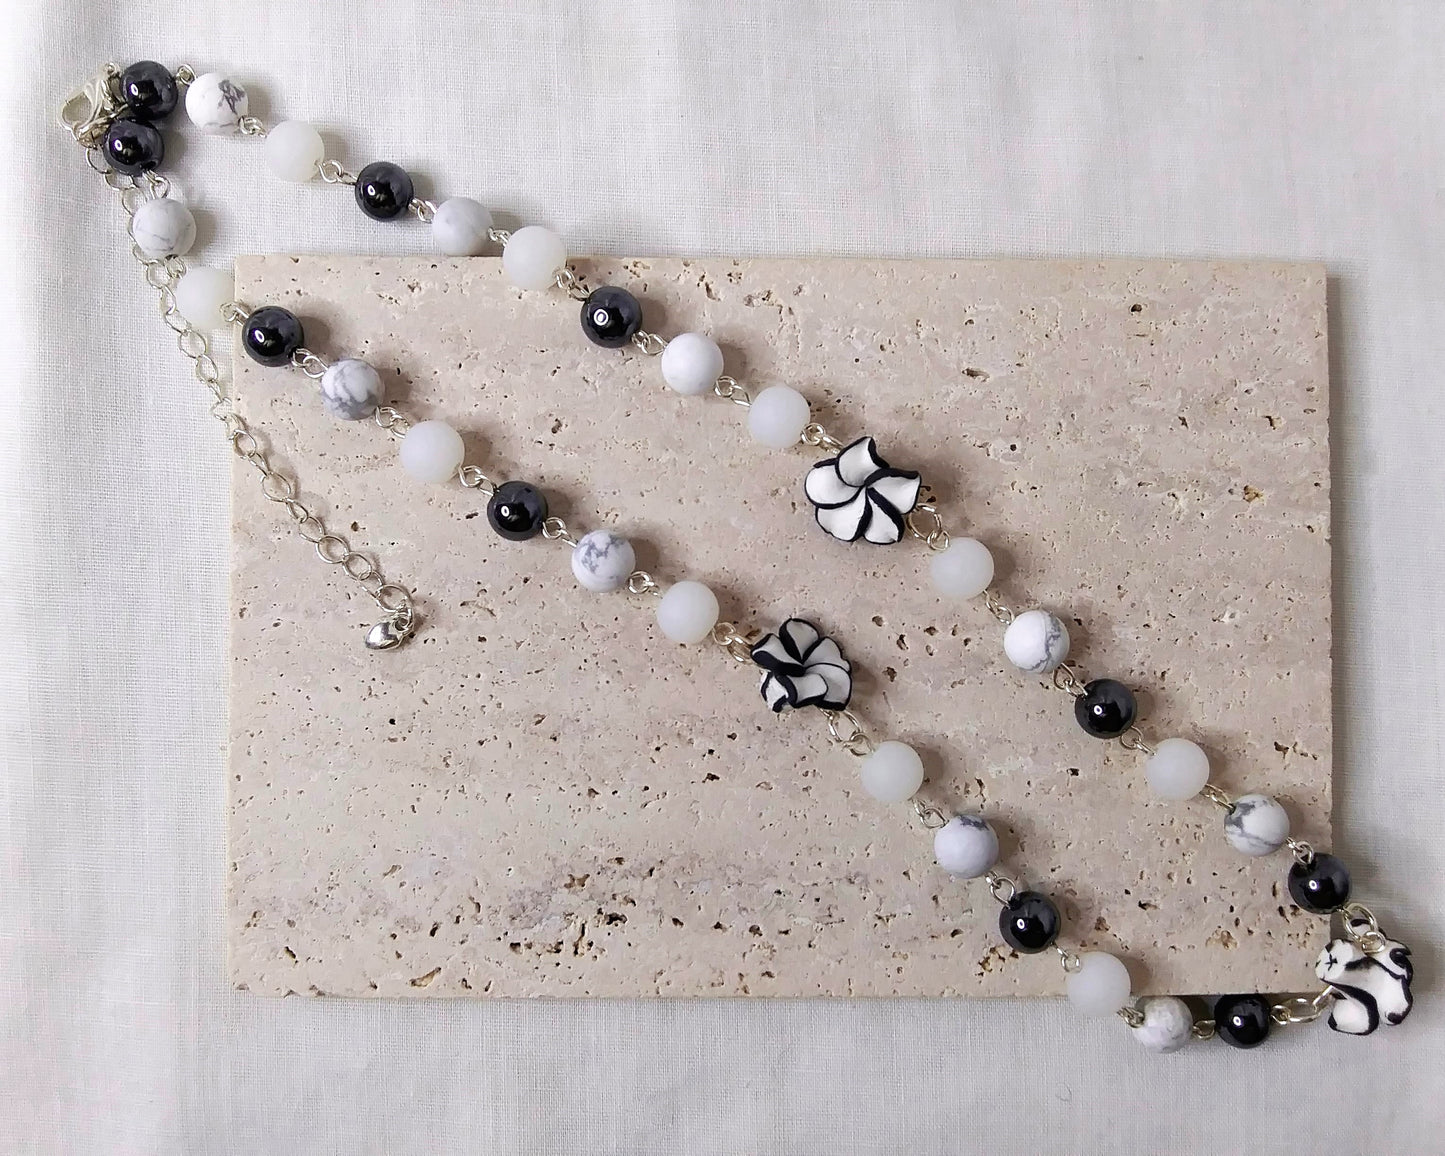 Gemstone Necklace, Silver Necklace, Hematite, howlite, white glass beads. Poly clay flower shape beads